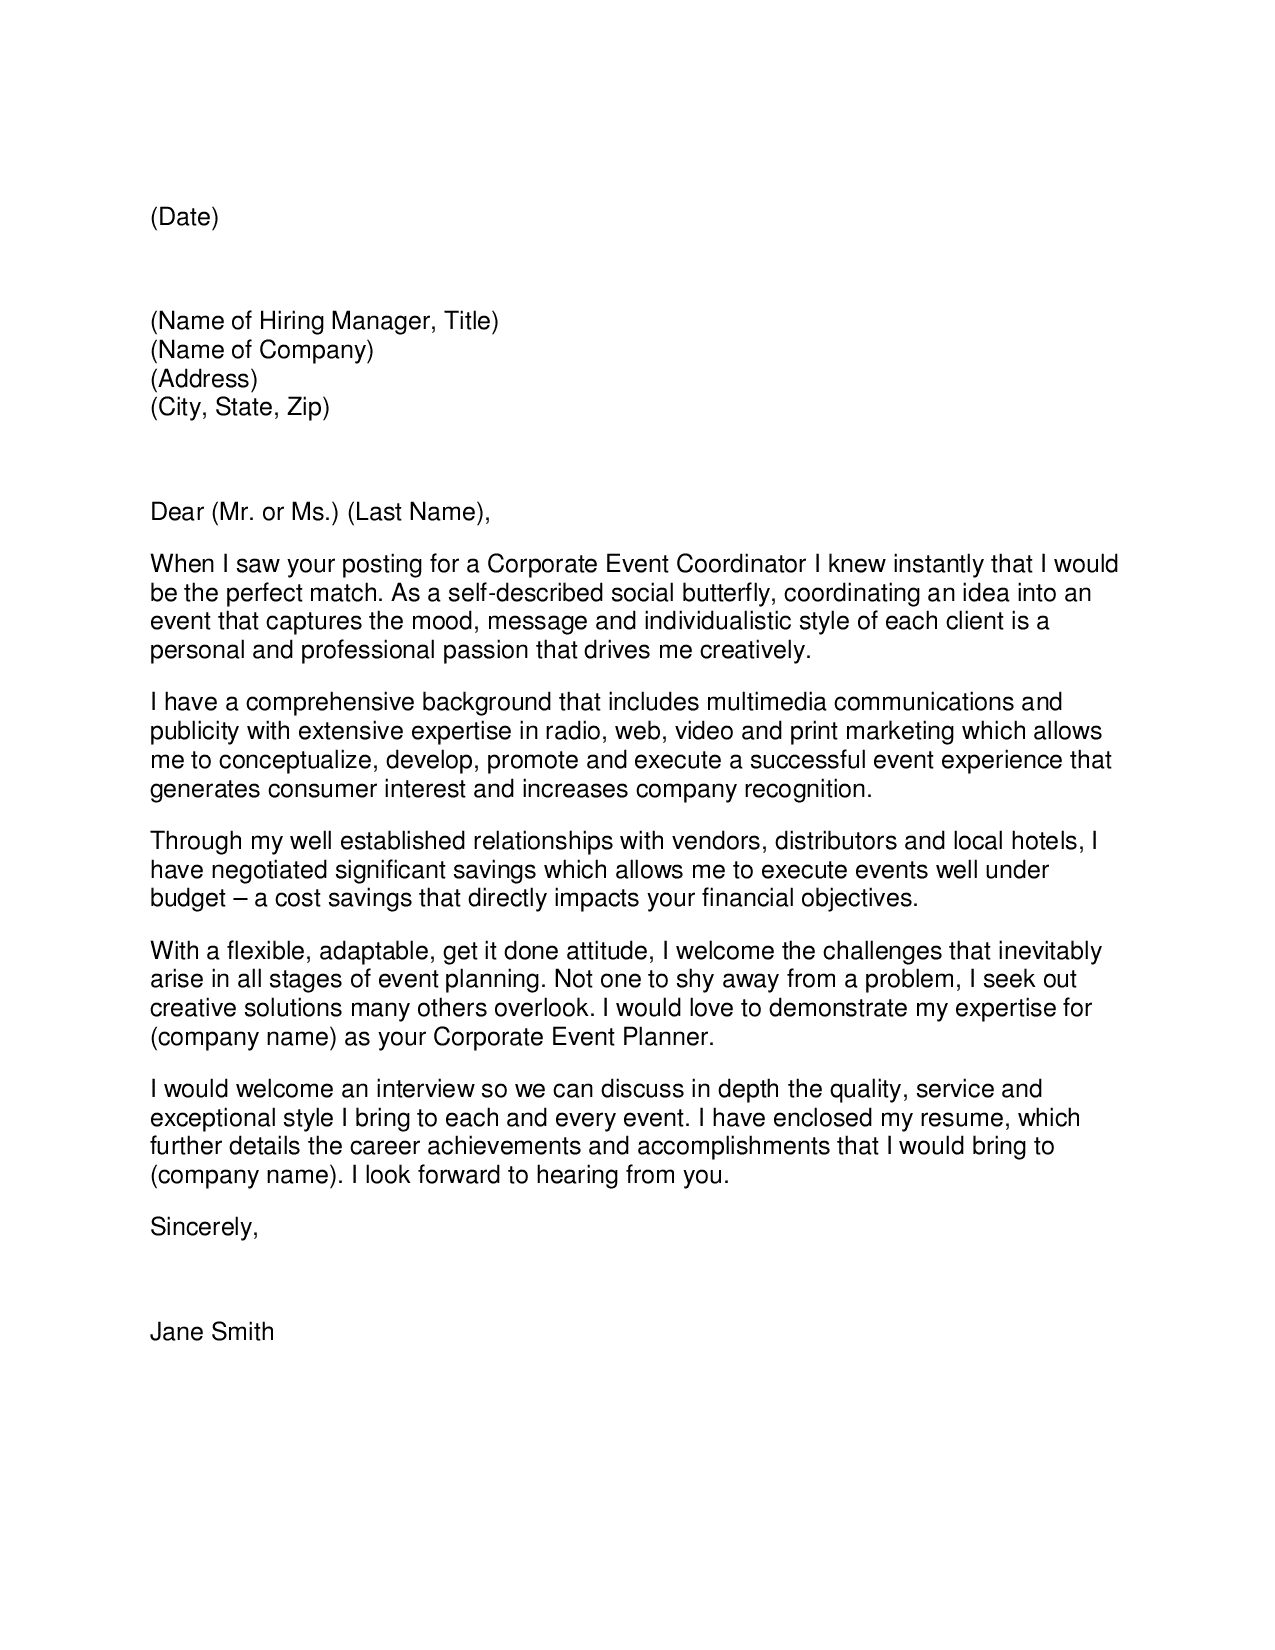 Cover letter to bring to interview